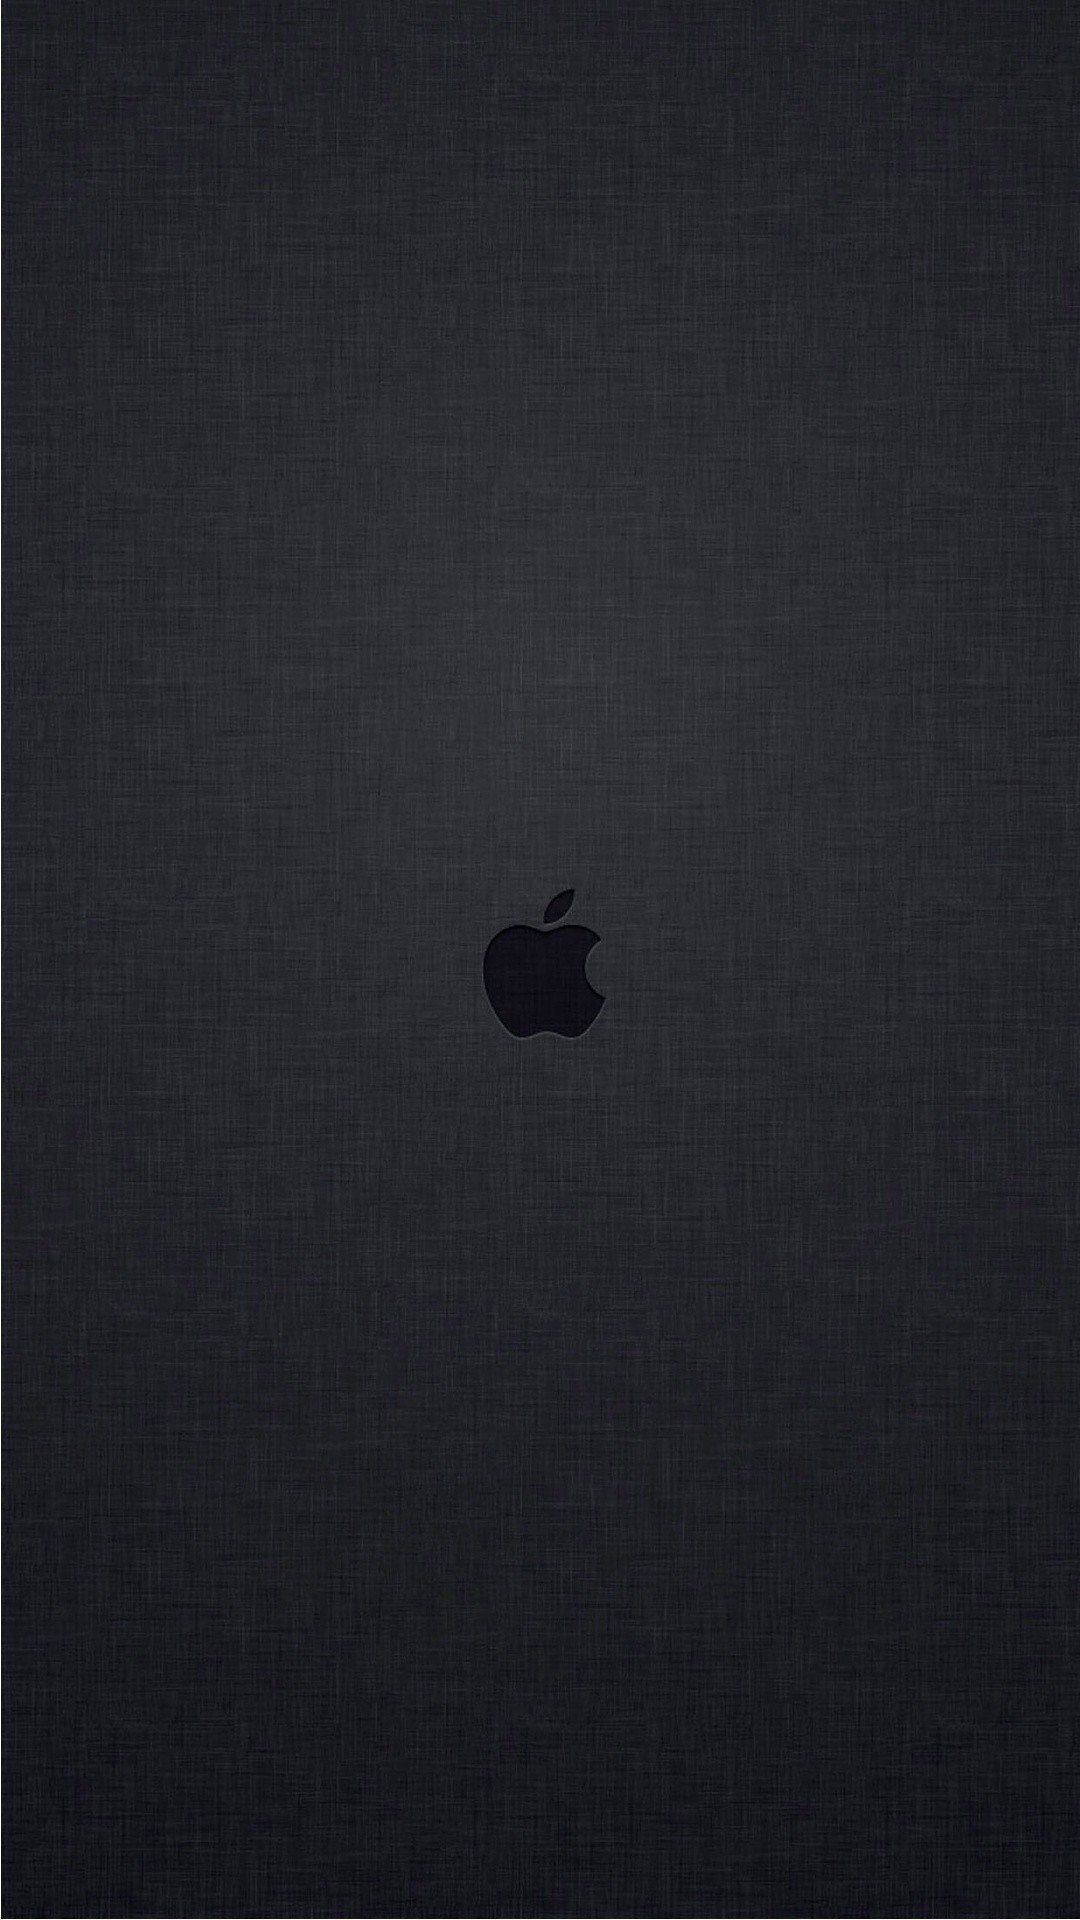 Best of Macintosh Apple Logo Wallpapers. Tap image for more! – @mobile9 |